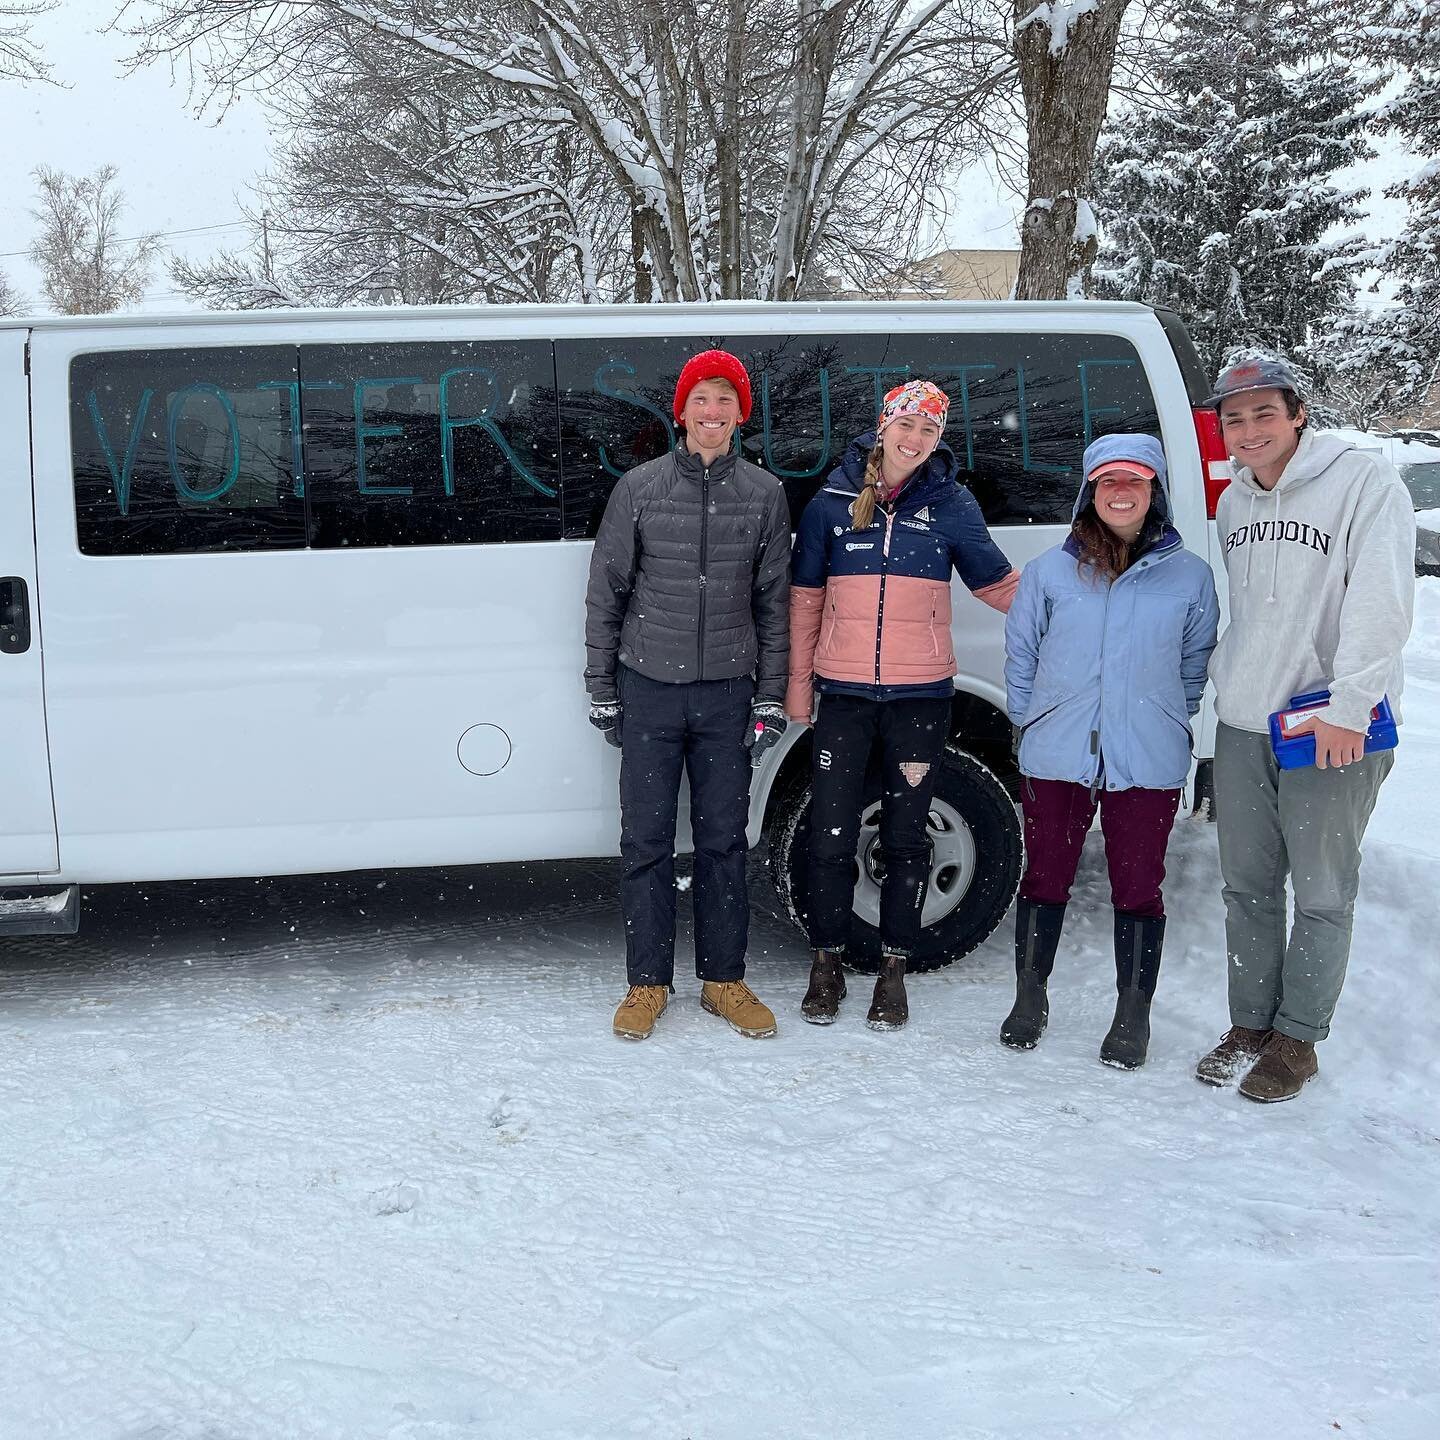 Neighbors helping neighbors get to the polls ❤️ A voter shuttle is available: message or call (406) 624-9390 if you'd like a ride today! 

#cromwellforcountyattorney #cromwell4gallatin #gallatincounty #gallatincountymontana #gallatinmt #bozeman #boze